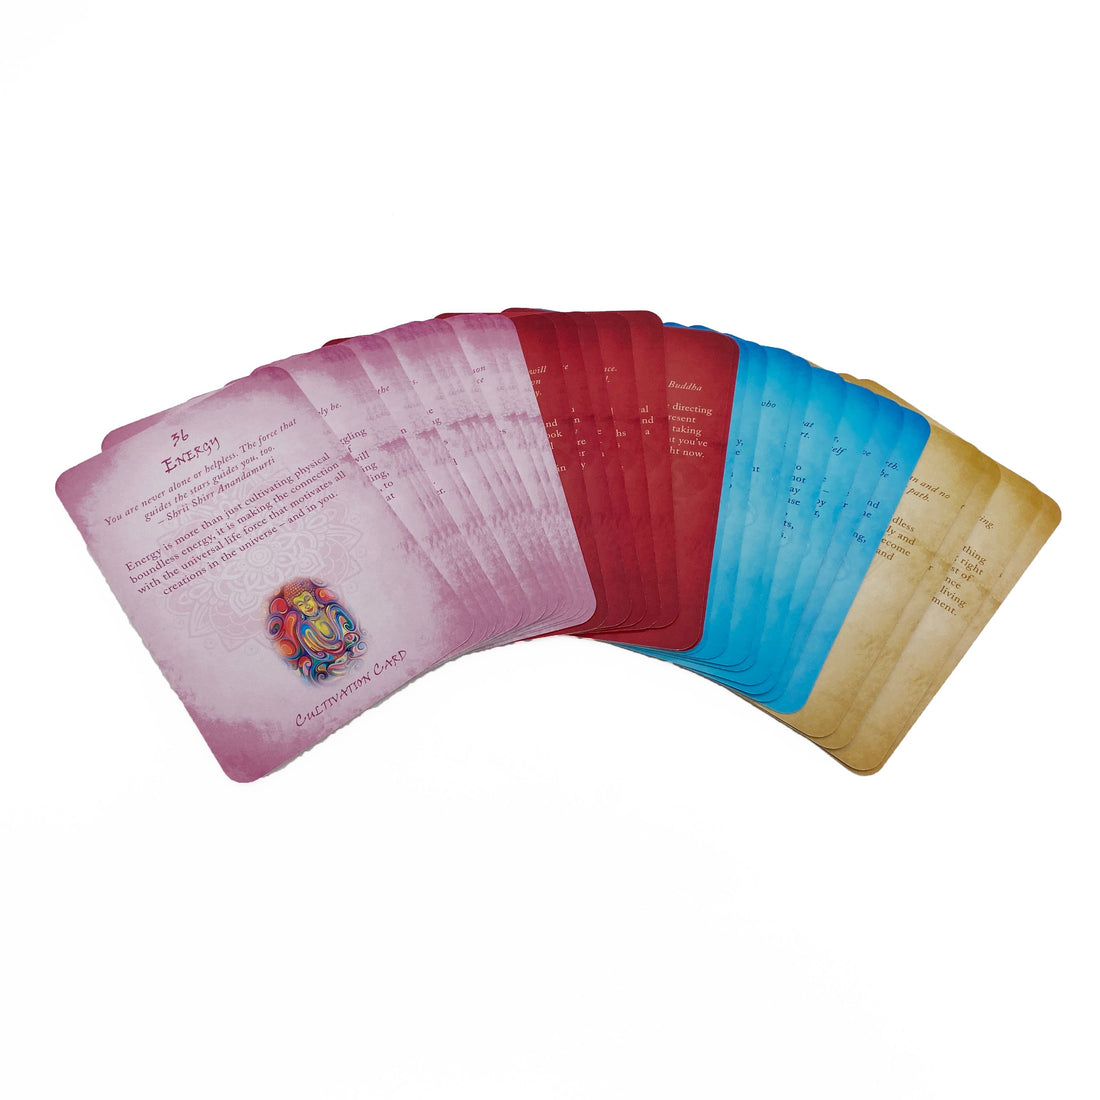 Buddhism Reading Cards Oracle Cards Non-HOI 